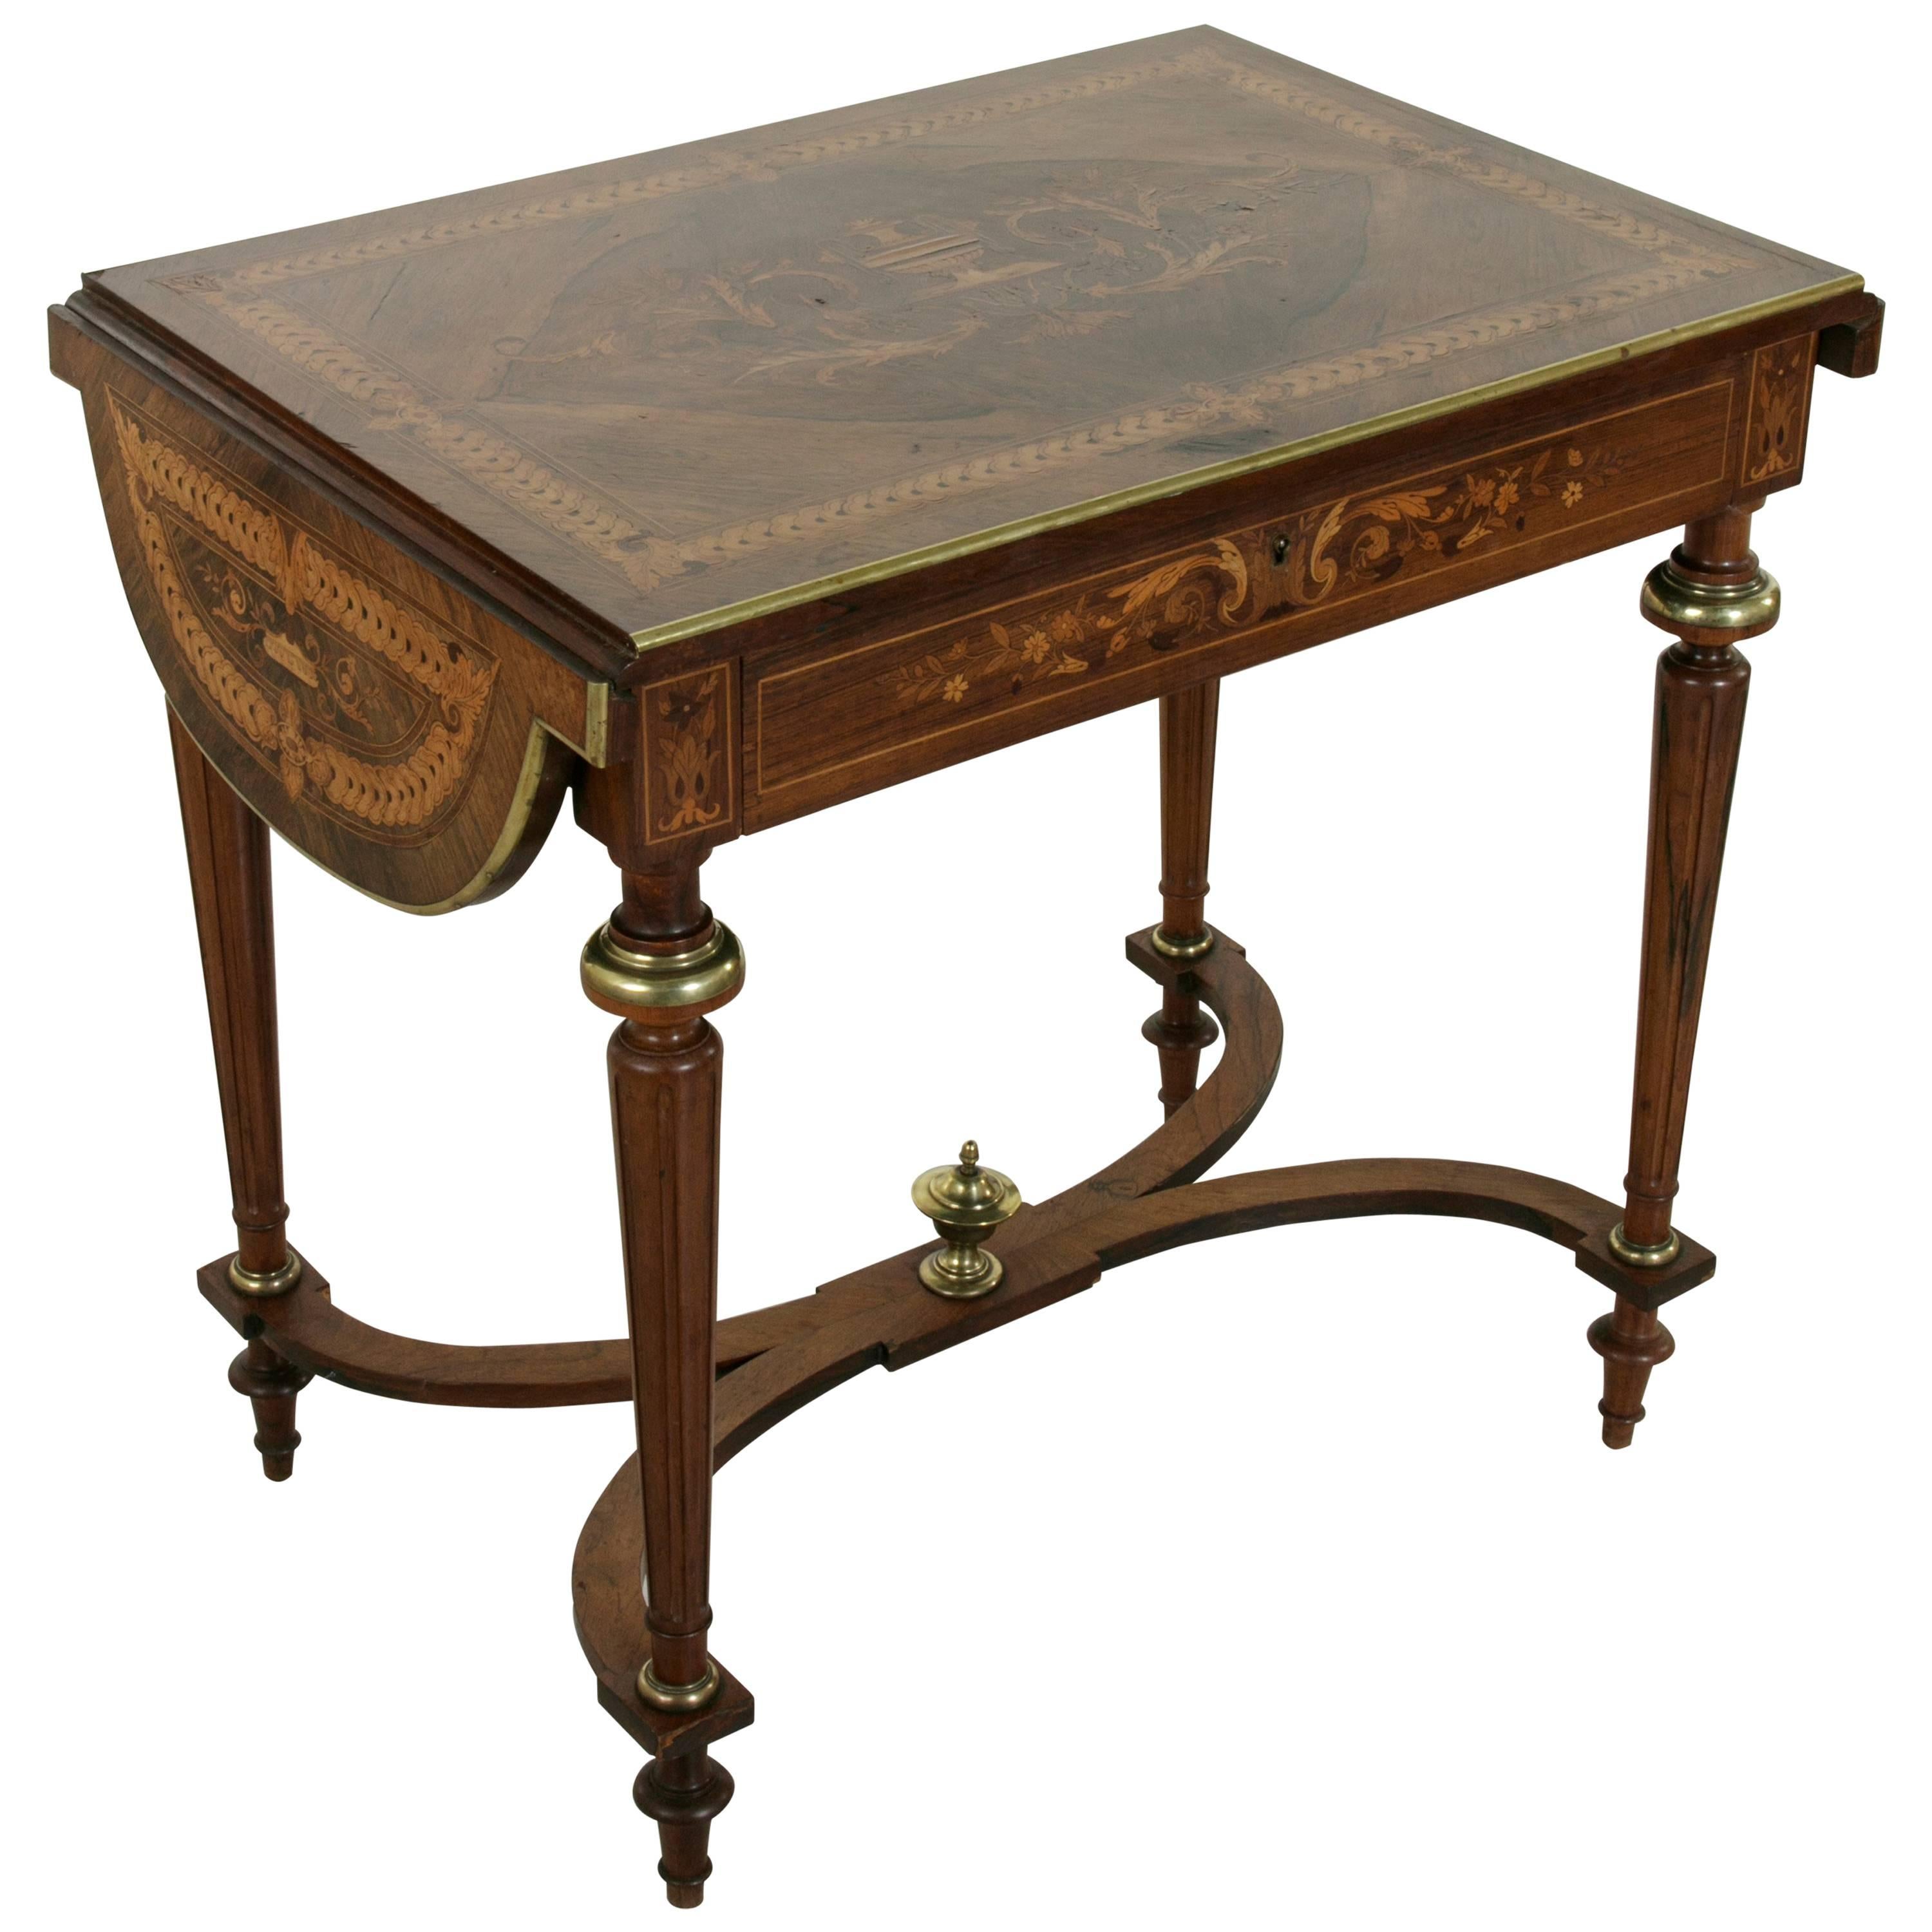 19th Century Napoleon III Drop Leaf Marquetry Table with Exotic Woods and Bronze